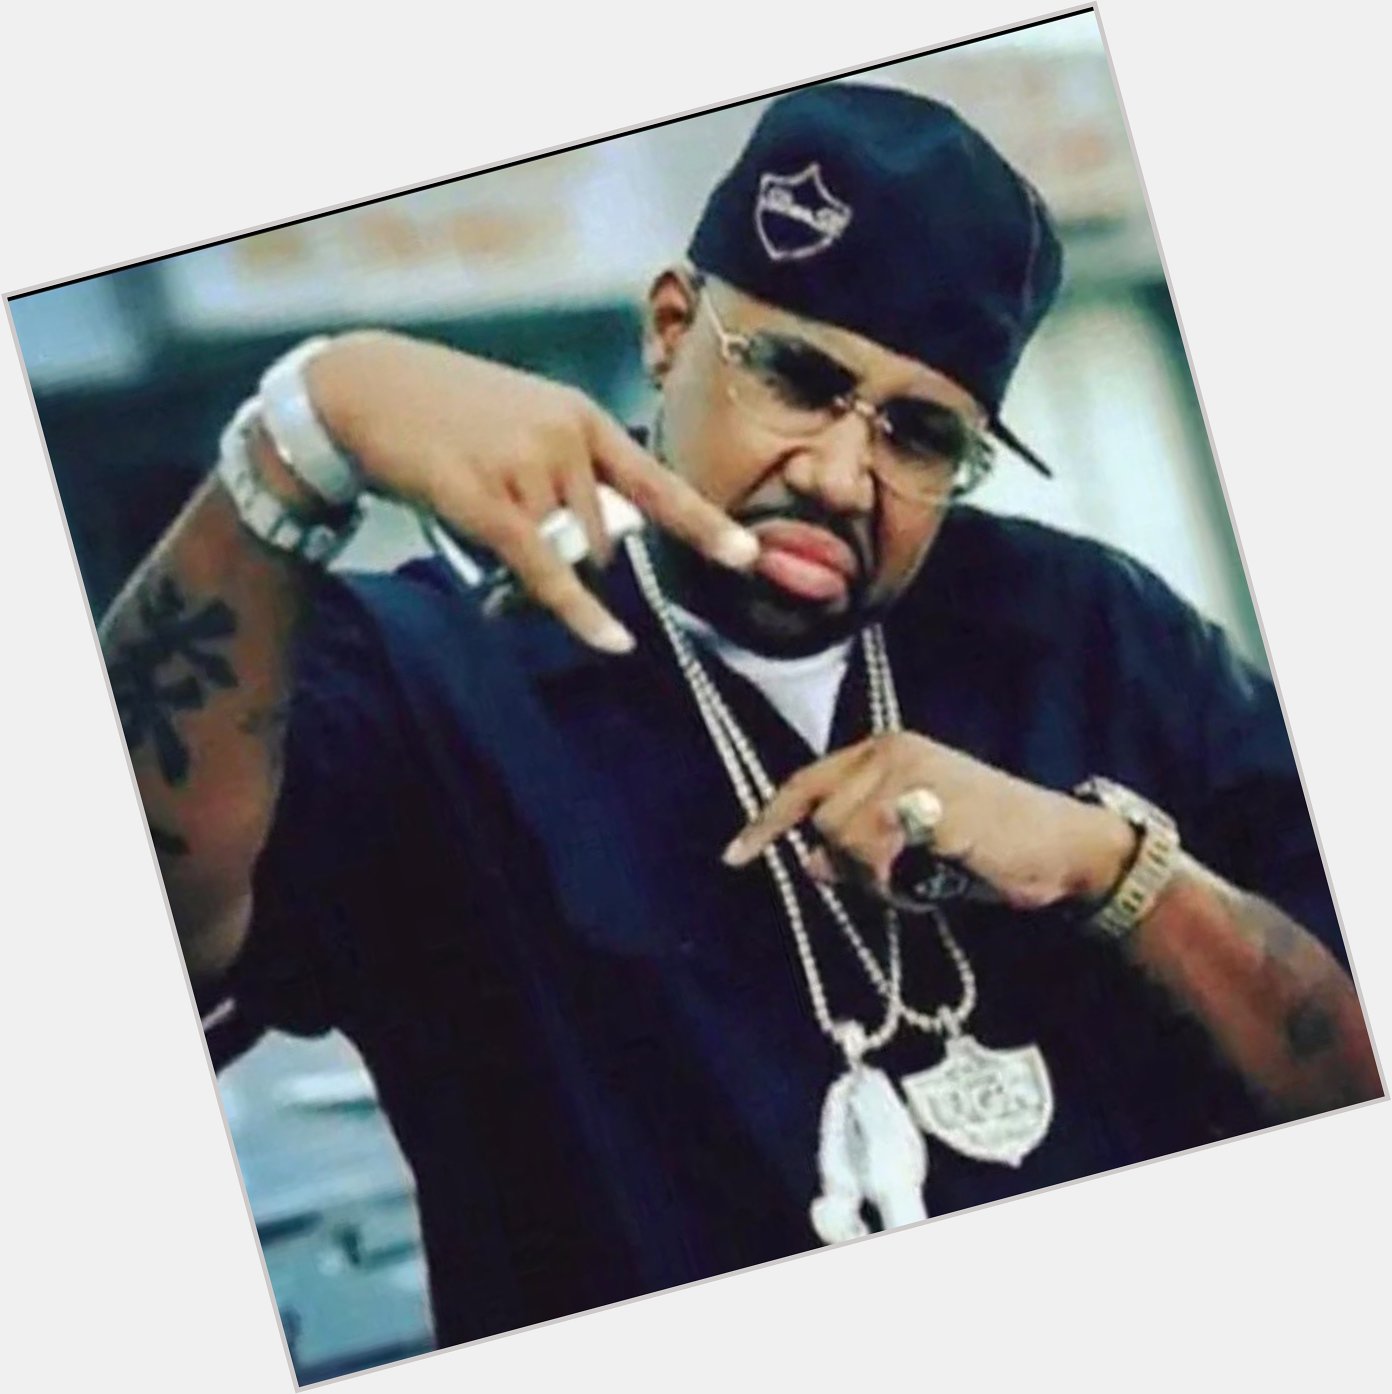 Happy 47th birthday to Pimp C
Rest in rhymes homie      